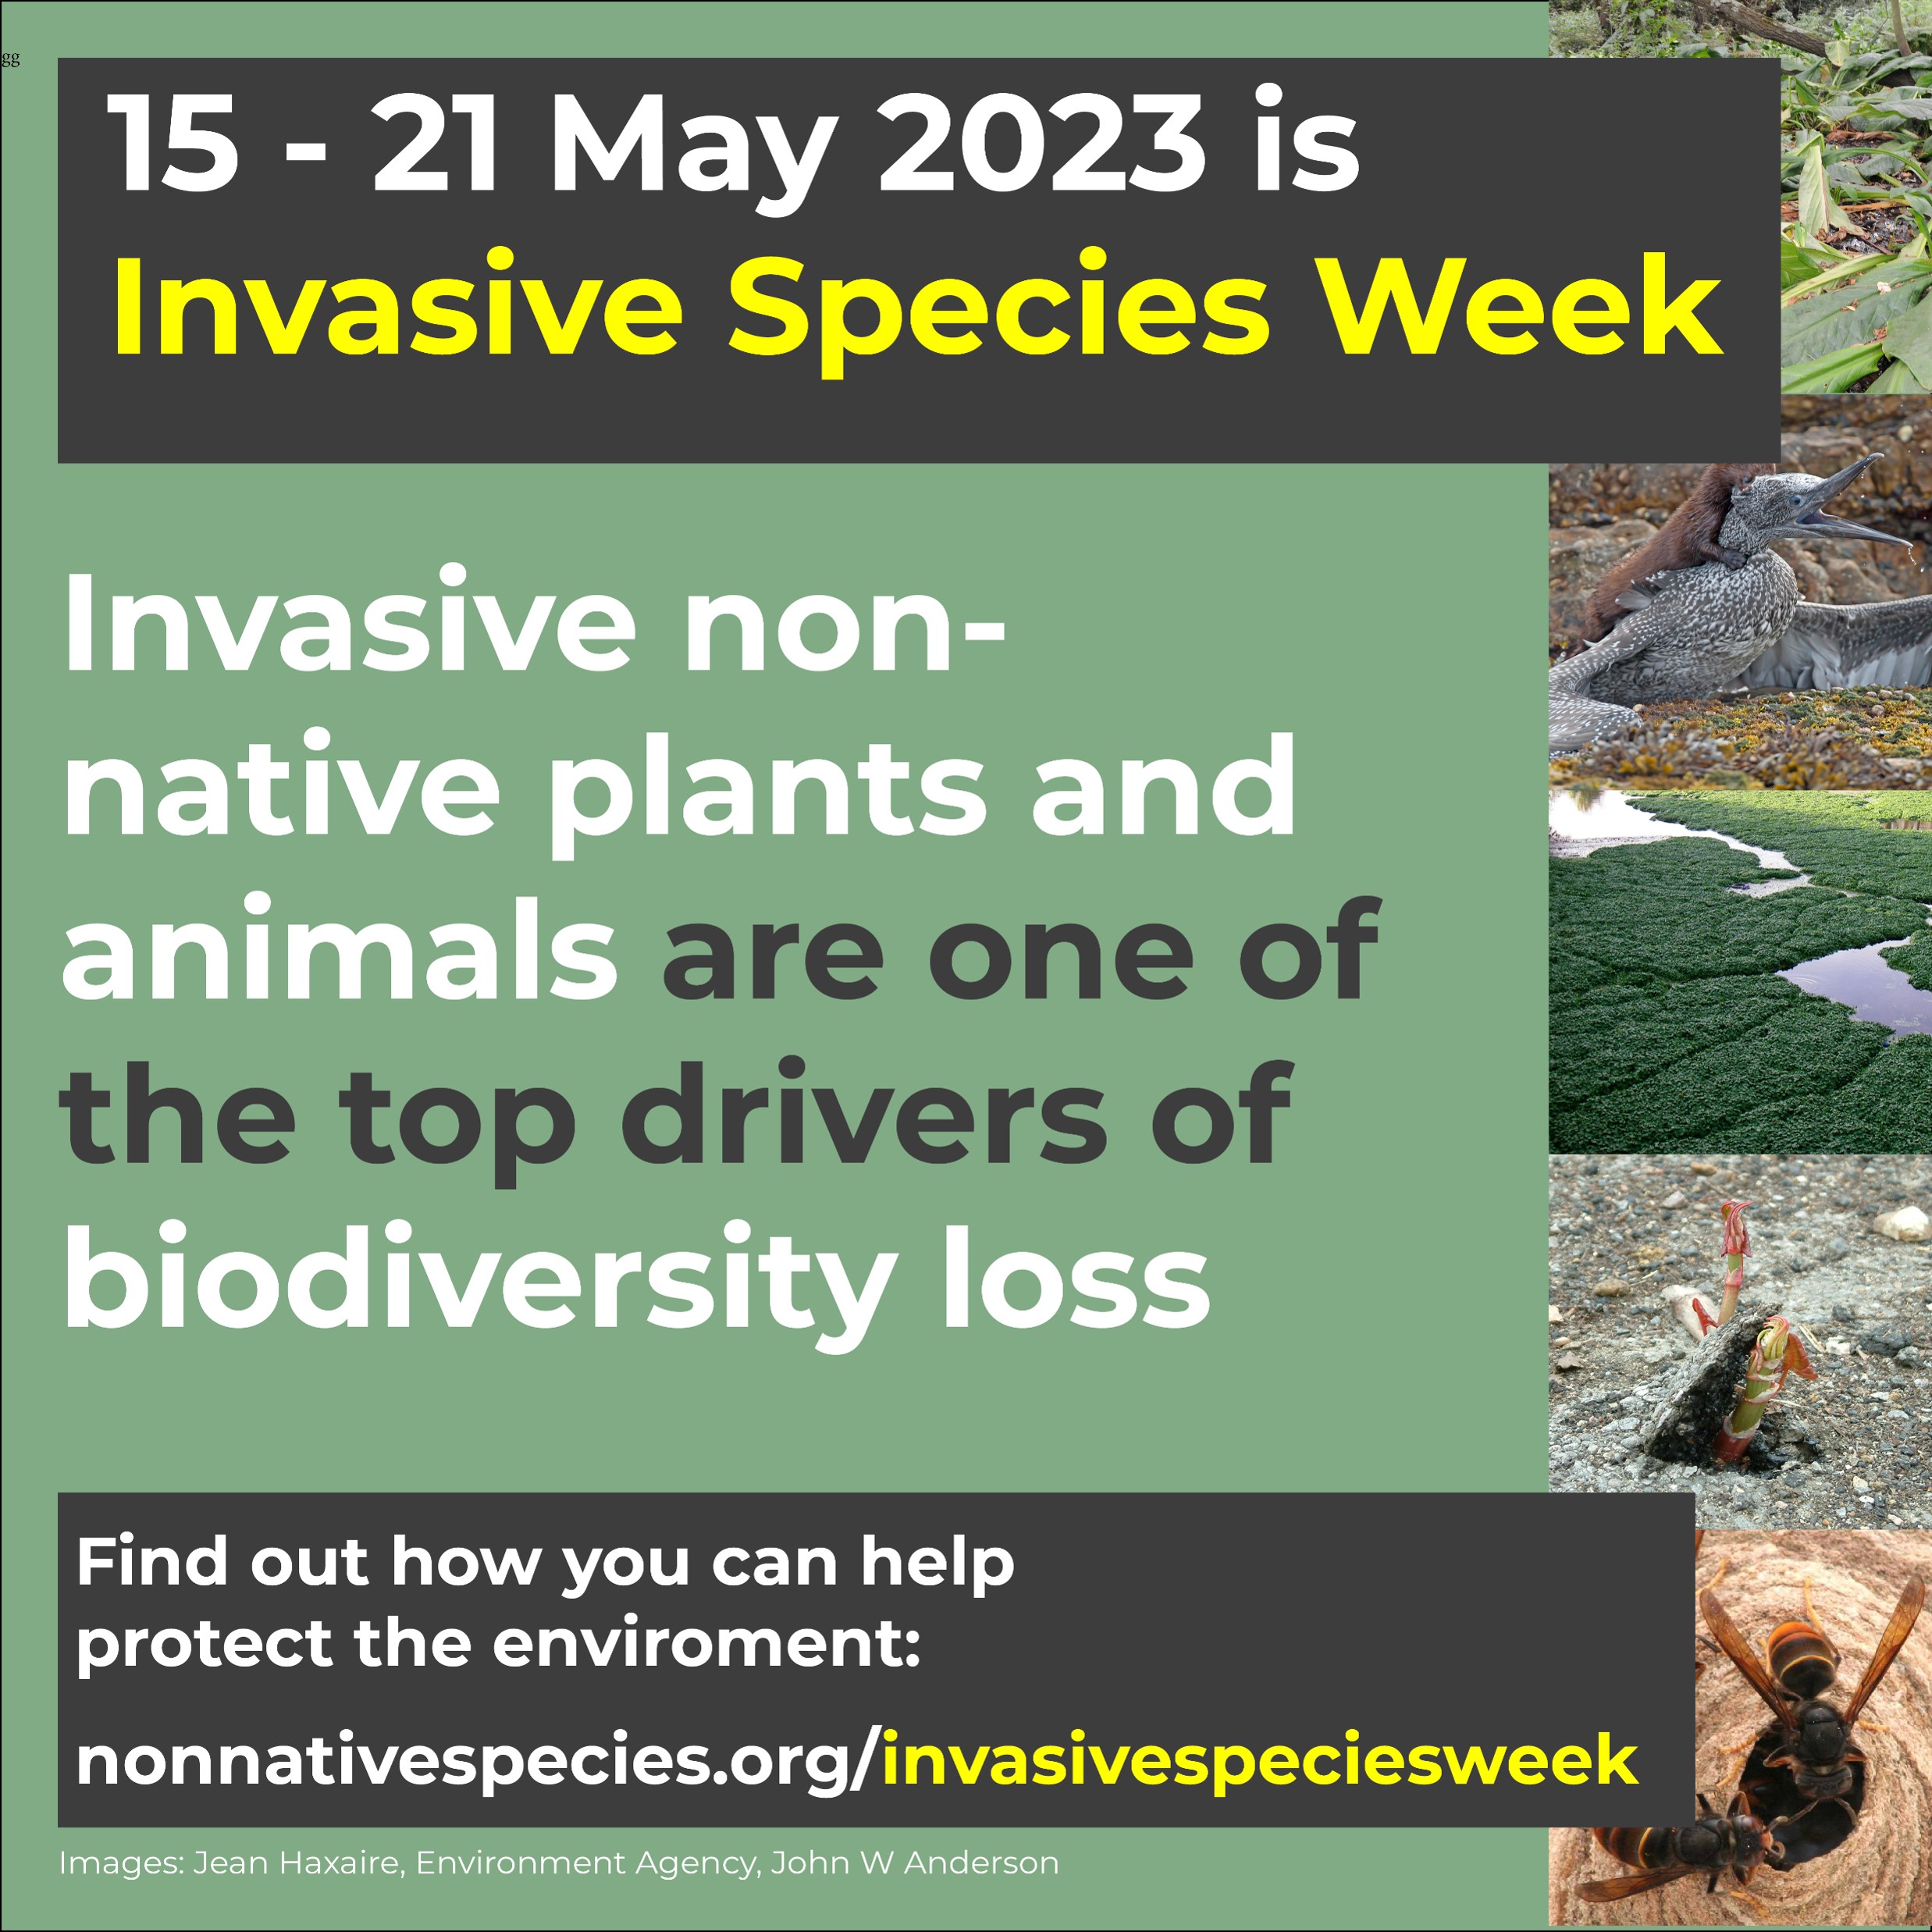 Invasive Species Week poster saying "Invasive non-native plants and animals are one of the top drivers of biodiversity loss"